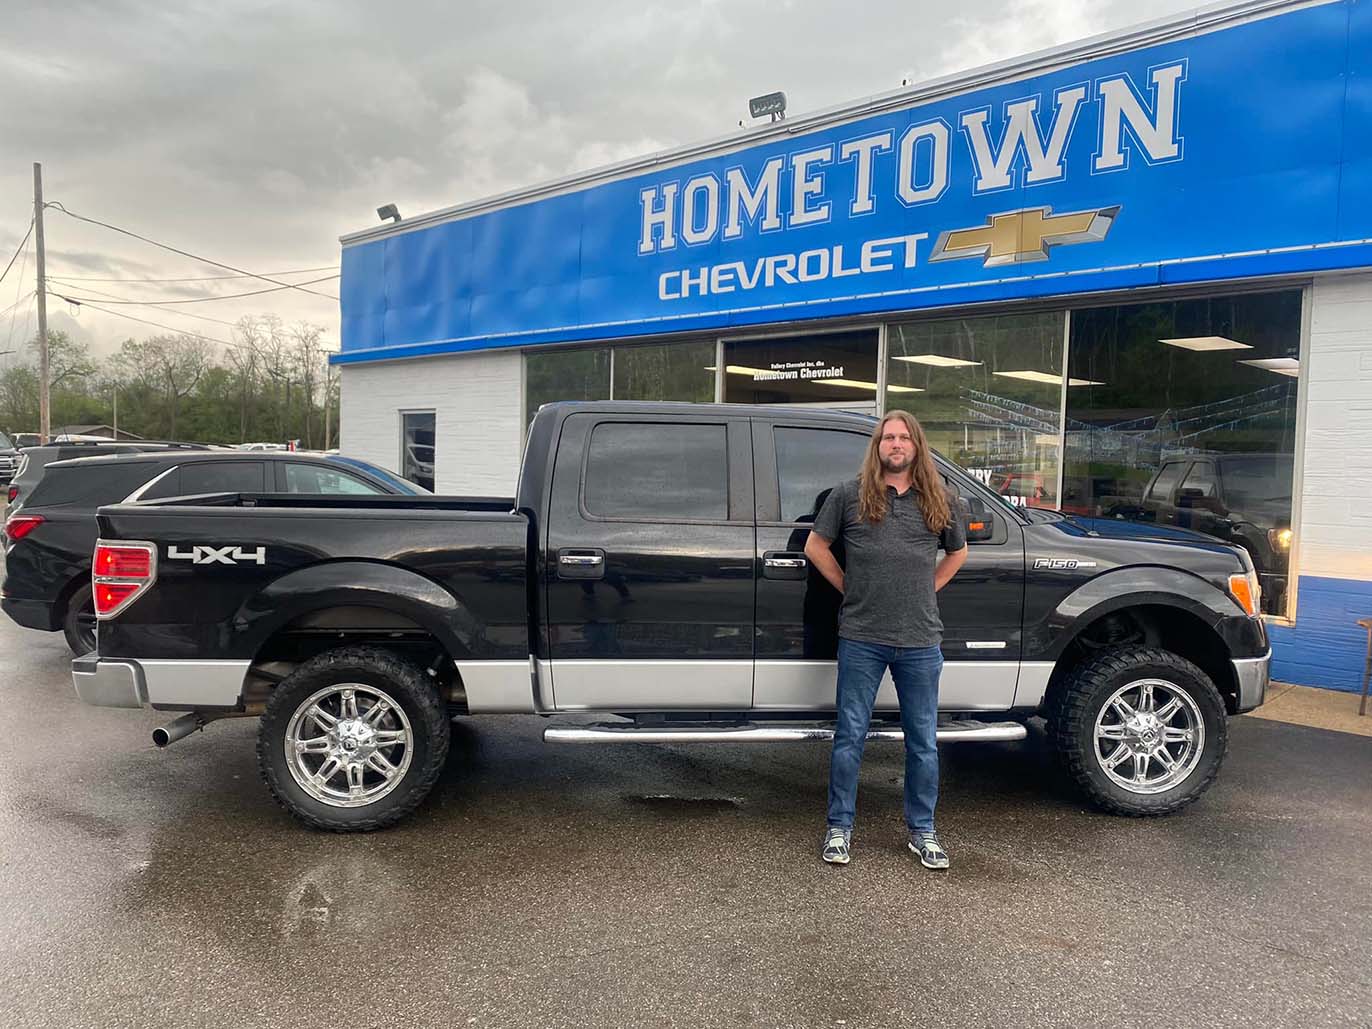 Used cars and trucks in Waverly, OH at Hometown Chevrolet.